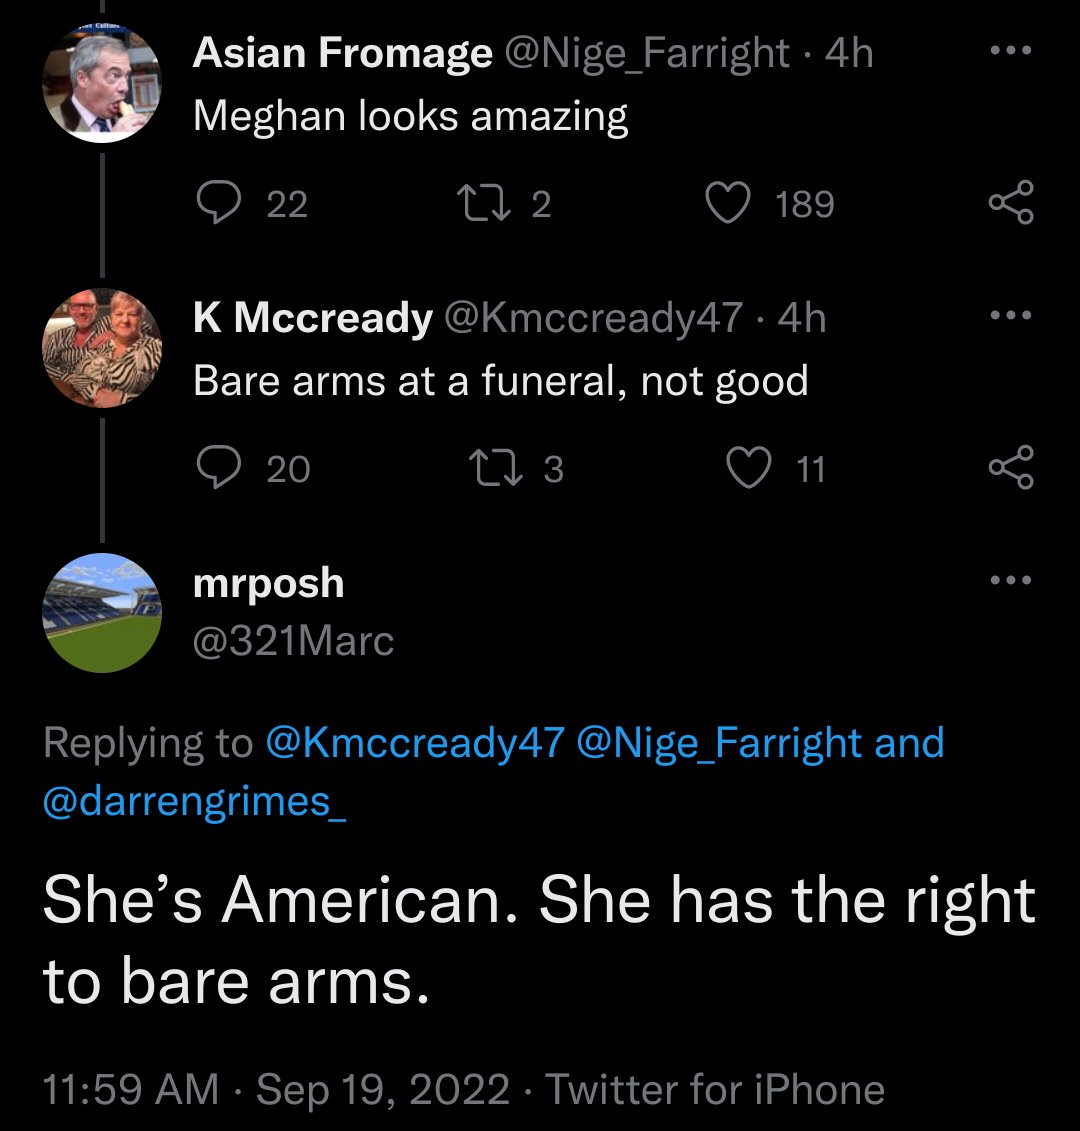 twitter did our font change - Callan Asian Fromage 4h Meghan looks amazing 17 2 22 K Mccready .4h Bare arms at a funeral, not good 17 3 11 20 mrposh 189 and Twitter for iPhone go go She's American. She has the right to bare arms. ...